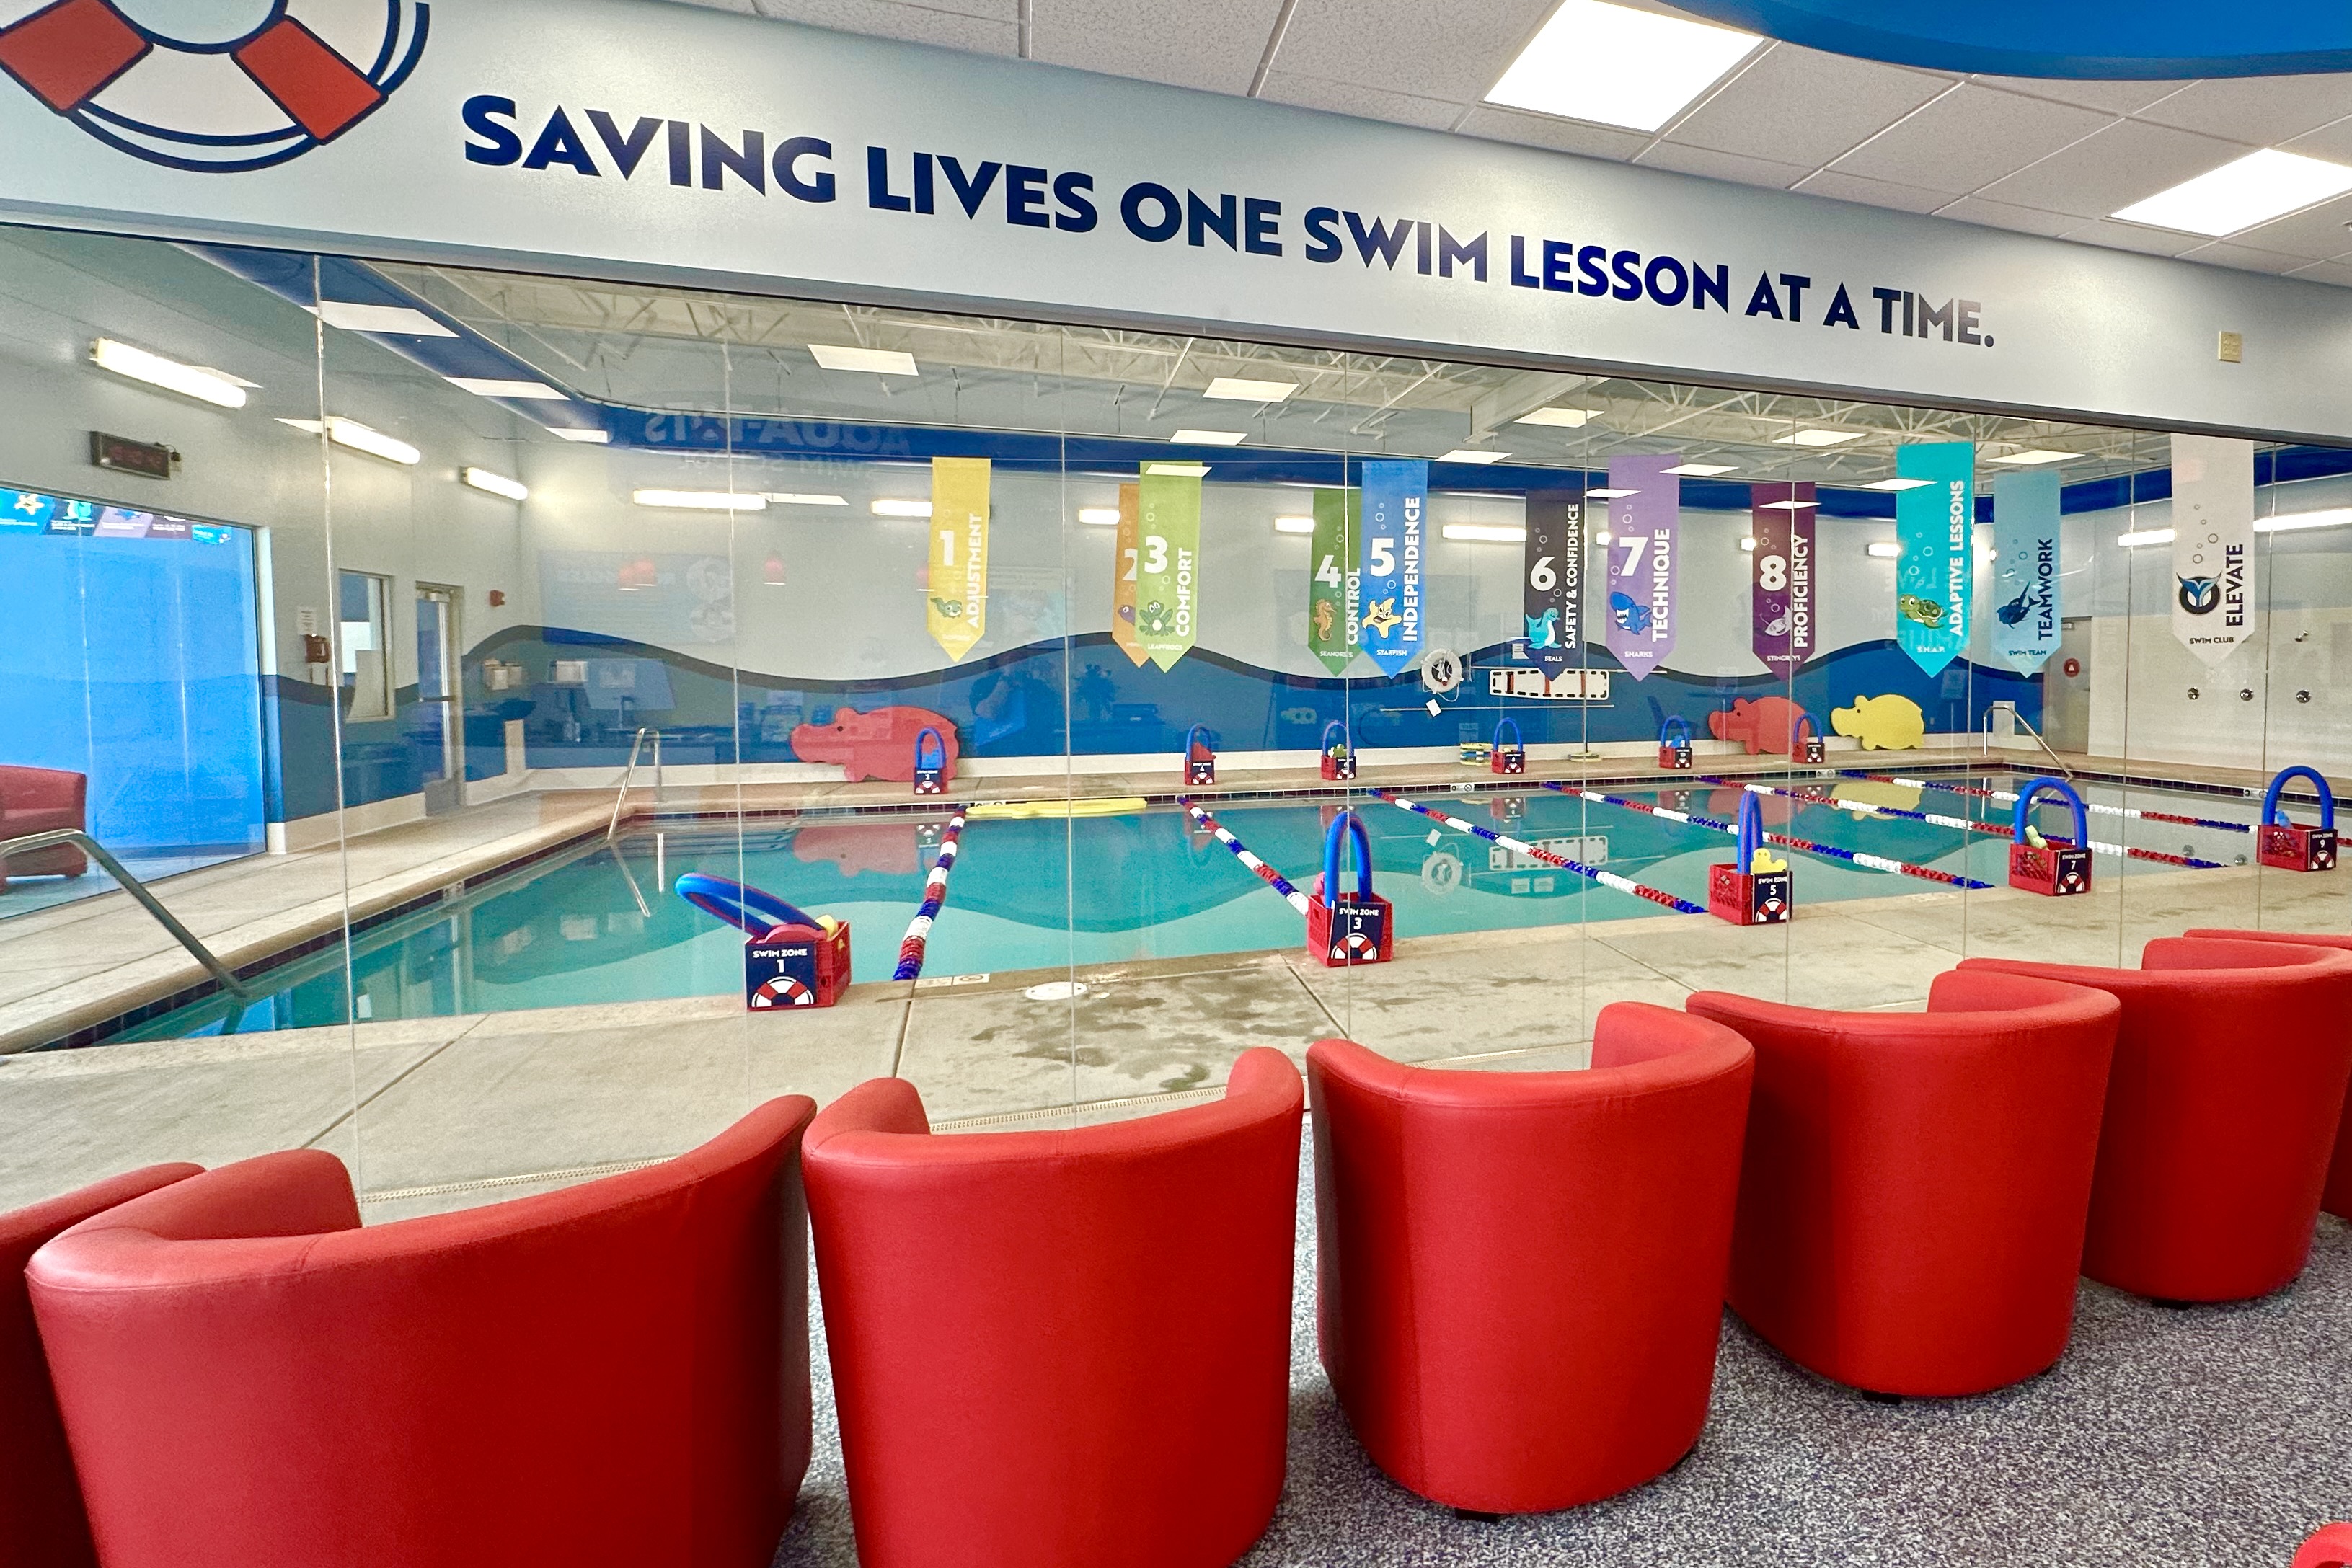 With a 57-foot-long pool and 12 changing rooms, there is room for everyone at Aqua-Tots North Canton.